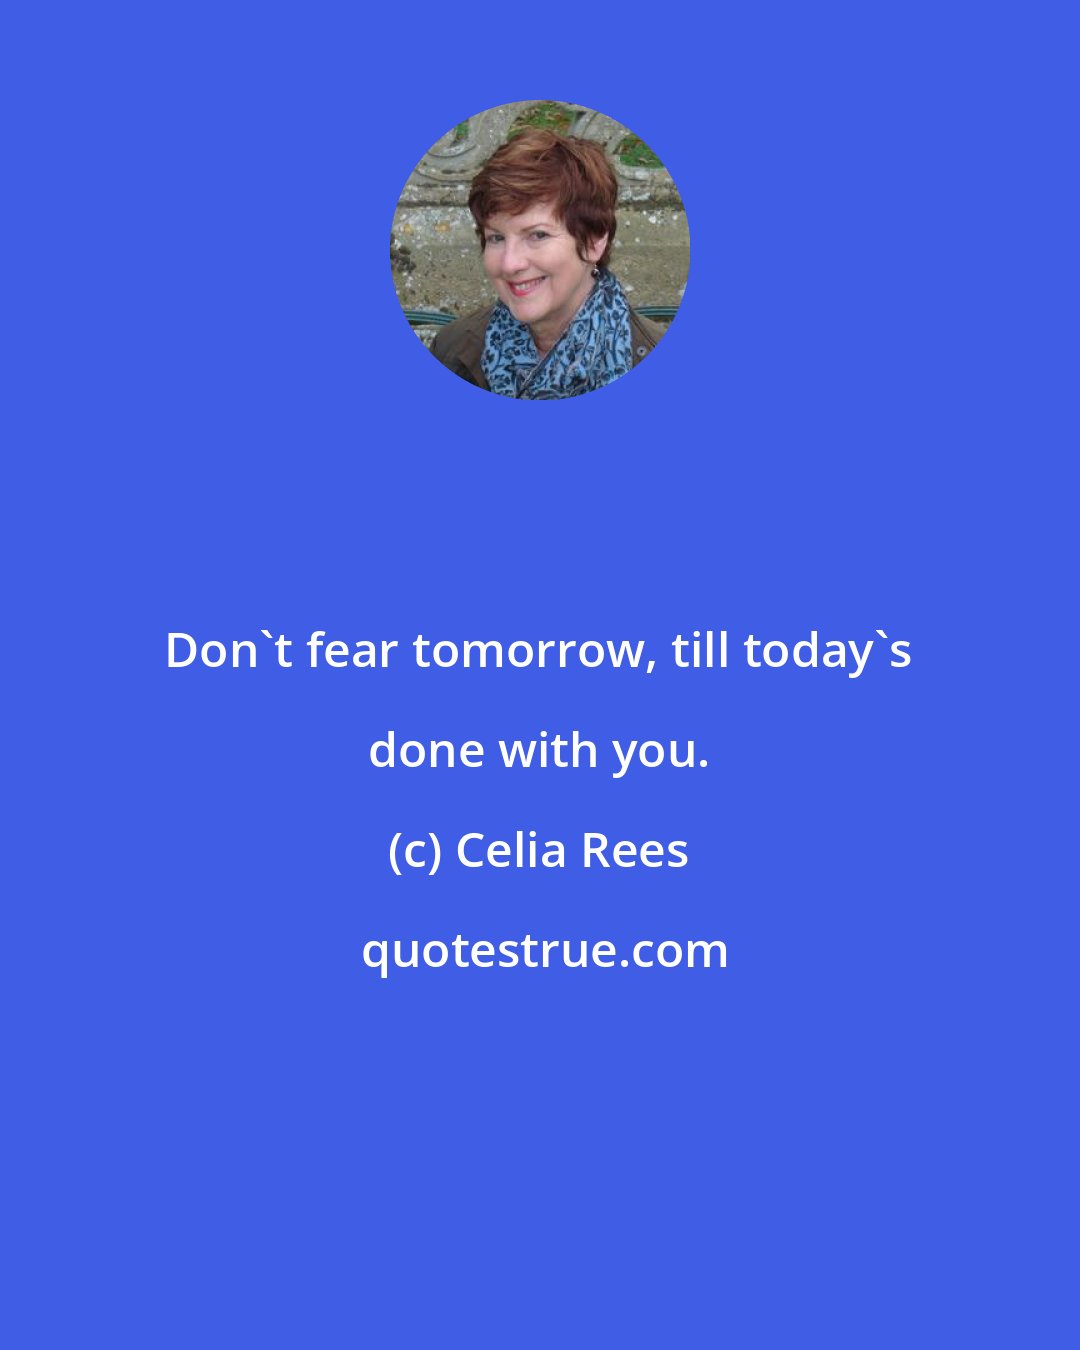 Celia Rees: Don't fear tomorrow, till today's done with you.